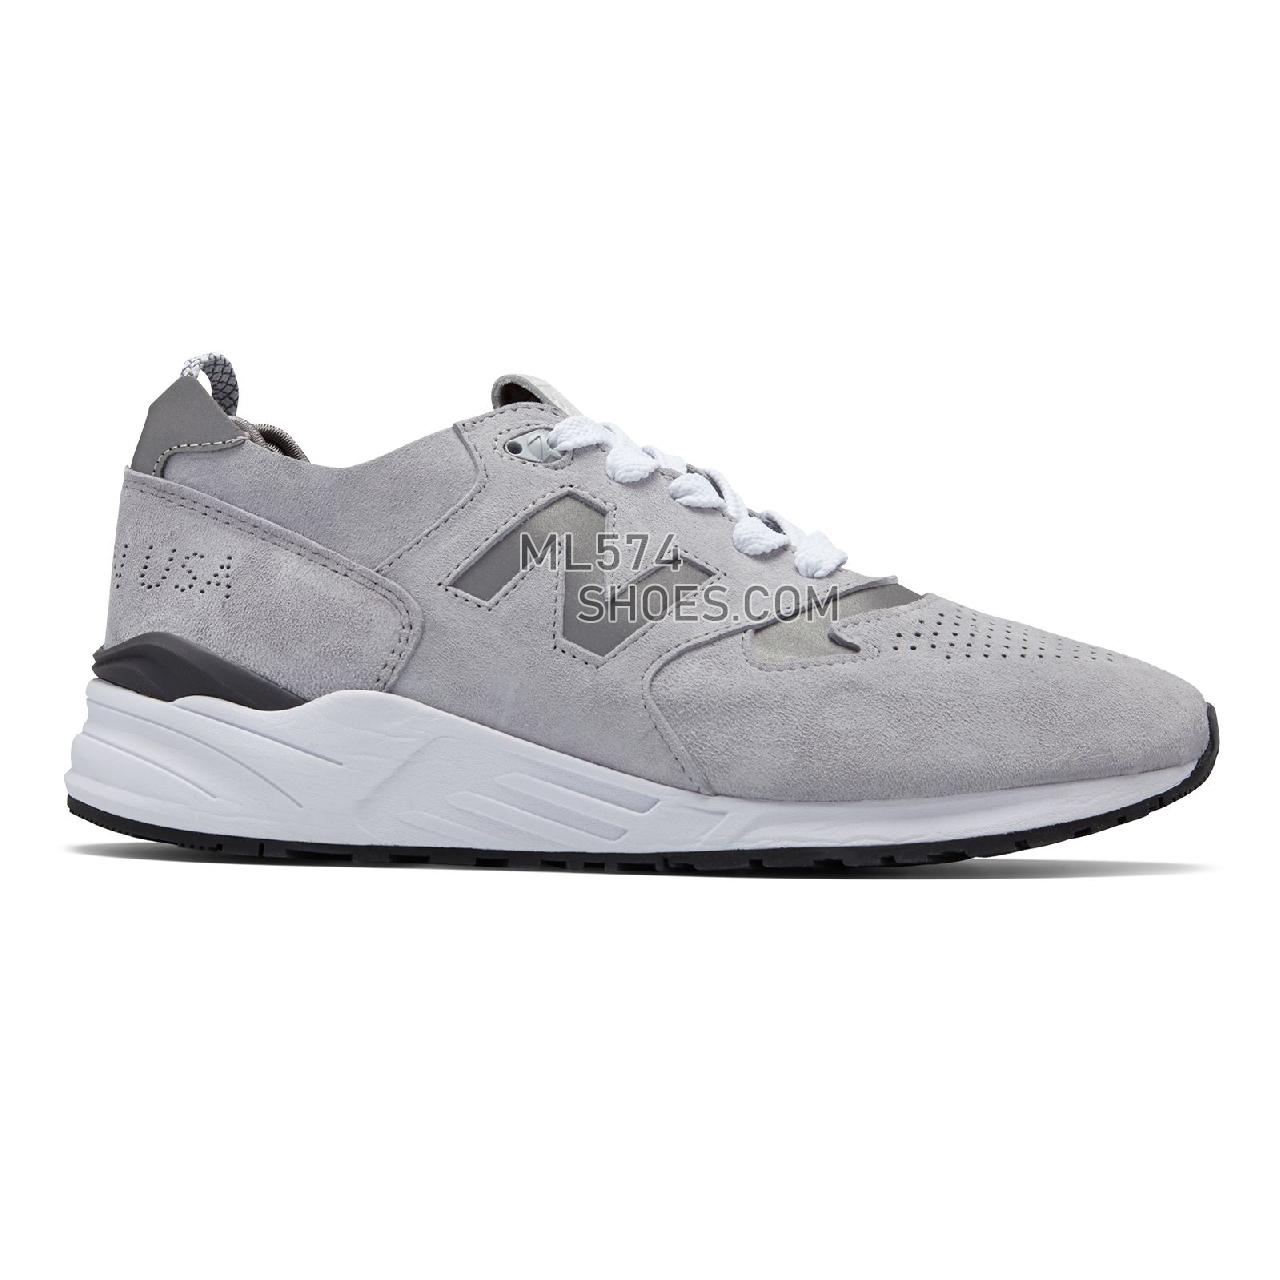 New Balance 999 Made in US - Men's 999 - Classic Grey with White - M999RTE